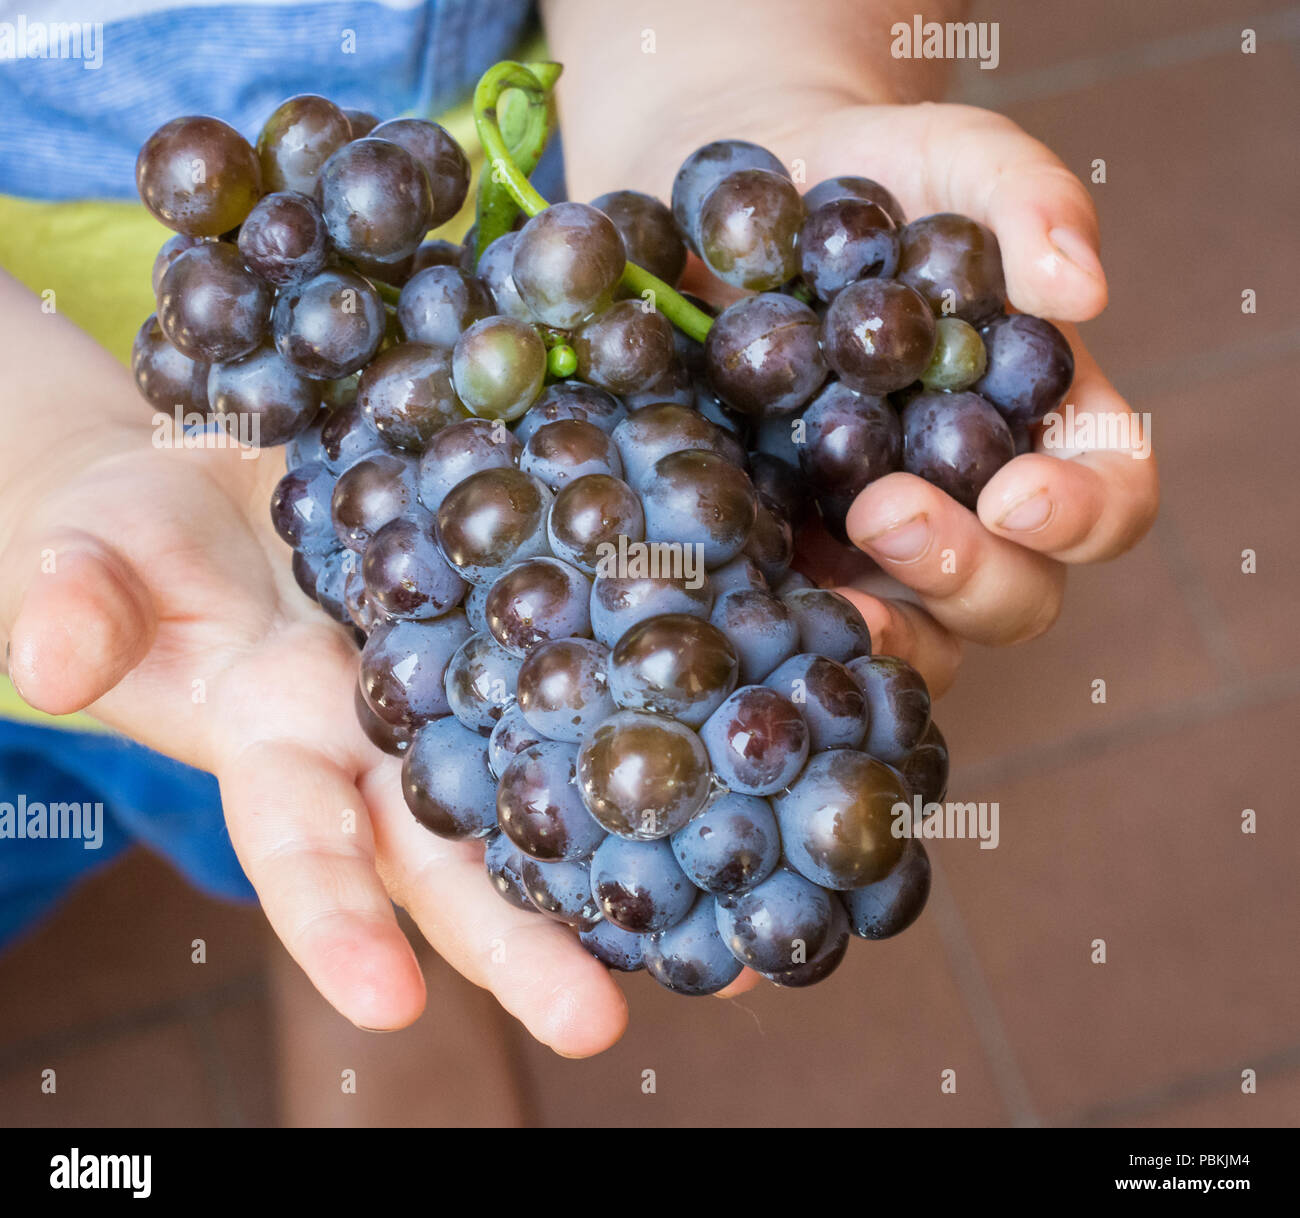 baby hands with a bunch of fresh grapes Stock Photo